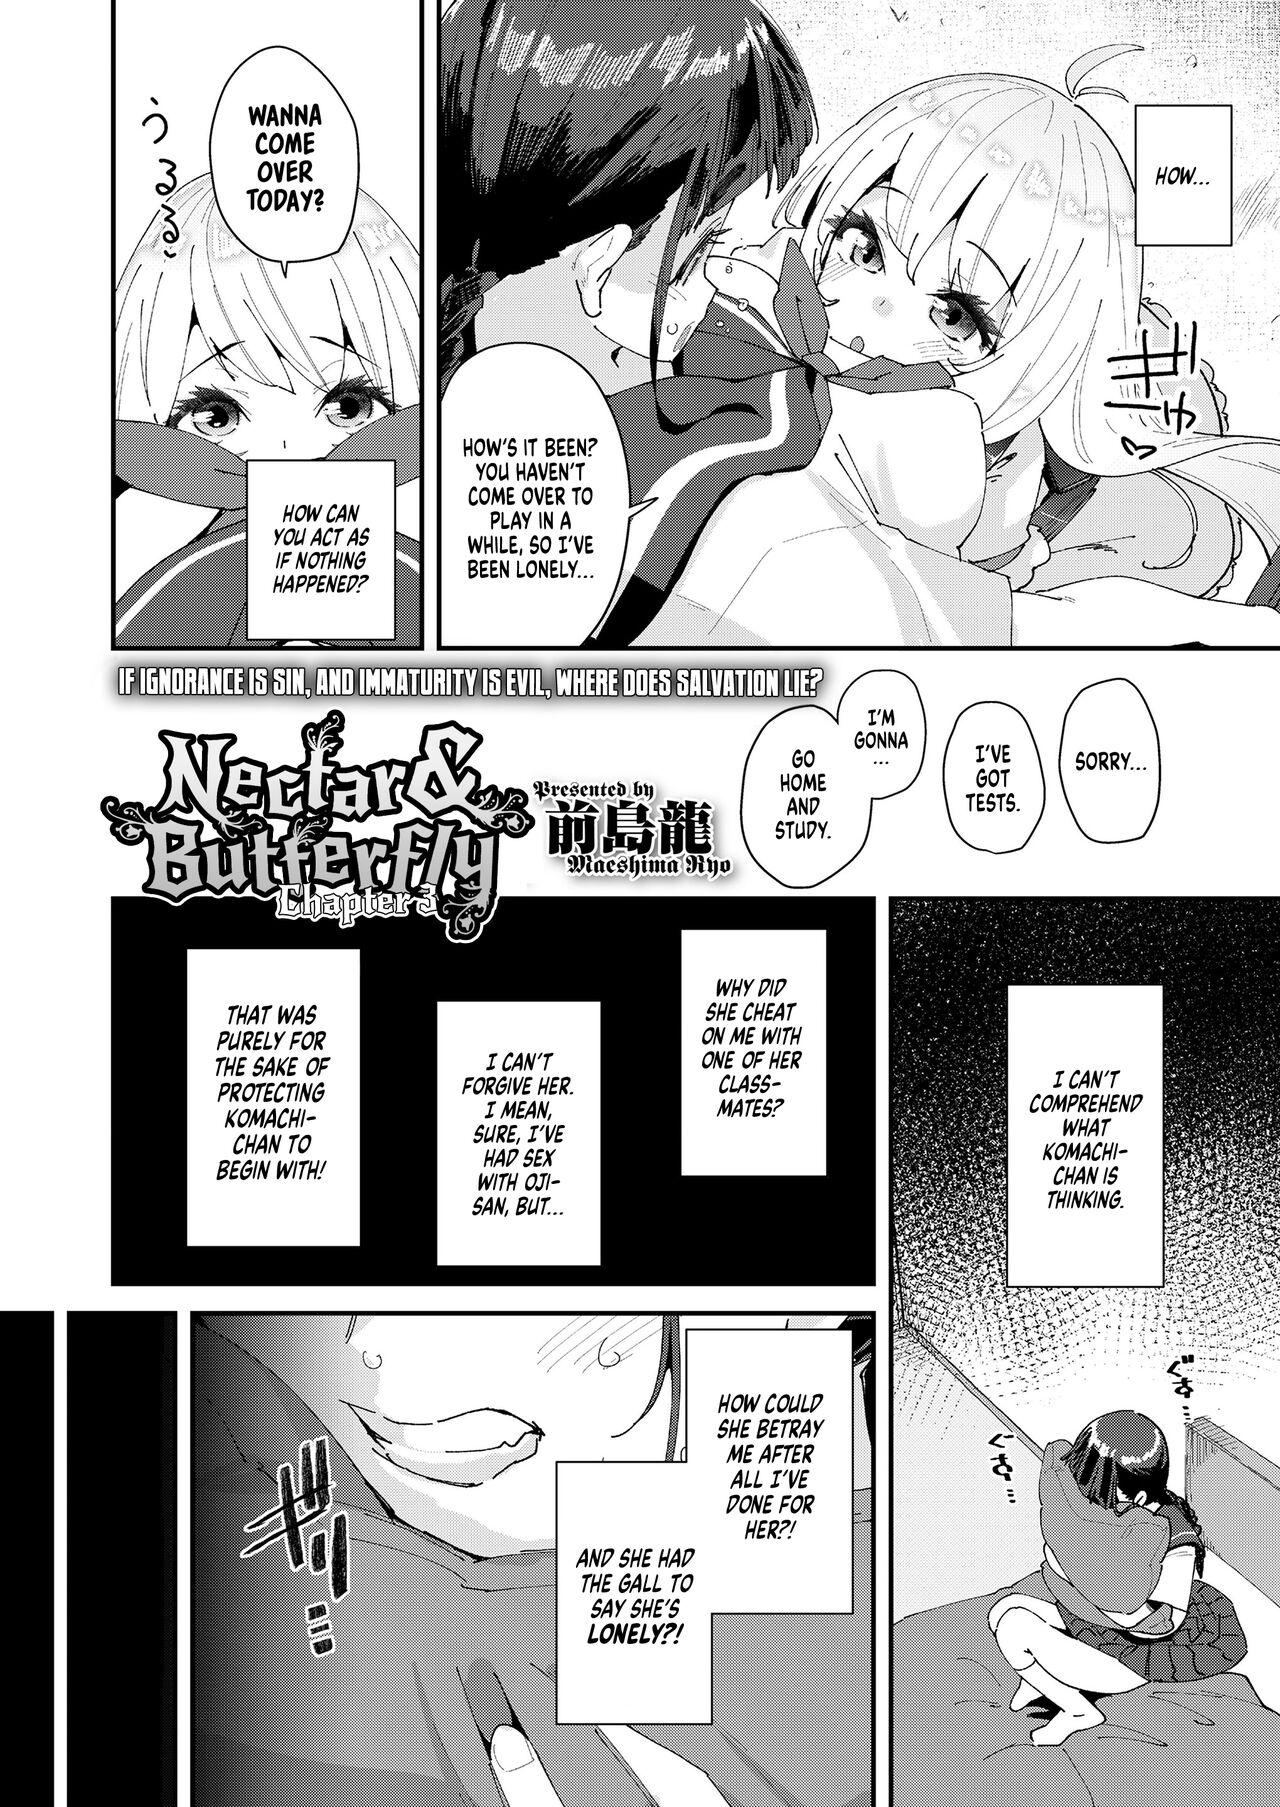 Slave Mitsu to Chou 3 | Nectar & Butterfly 3 Best Blowjob Ever - Page 2